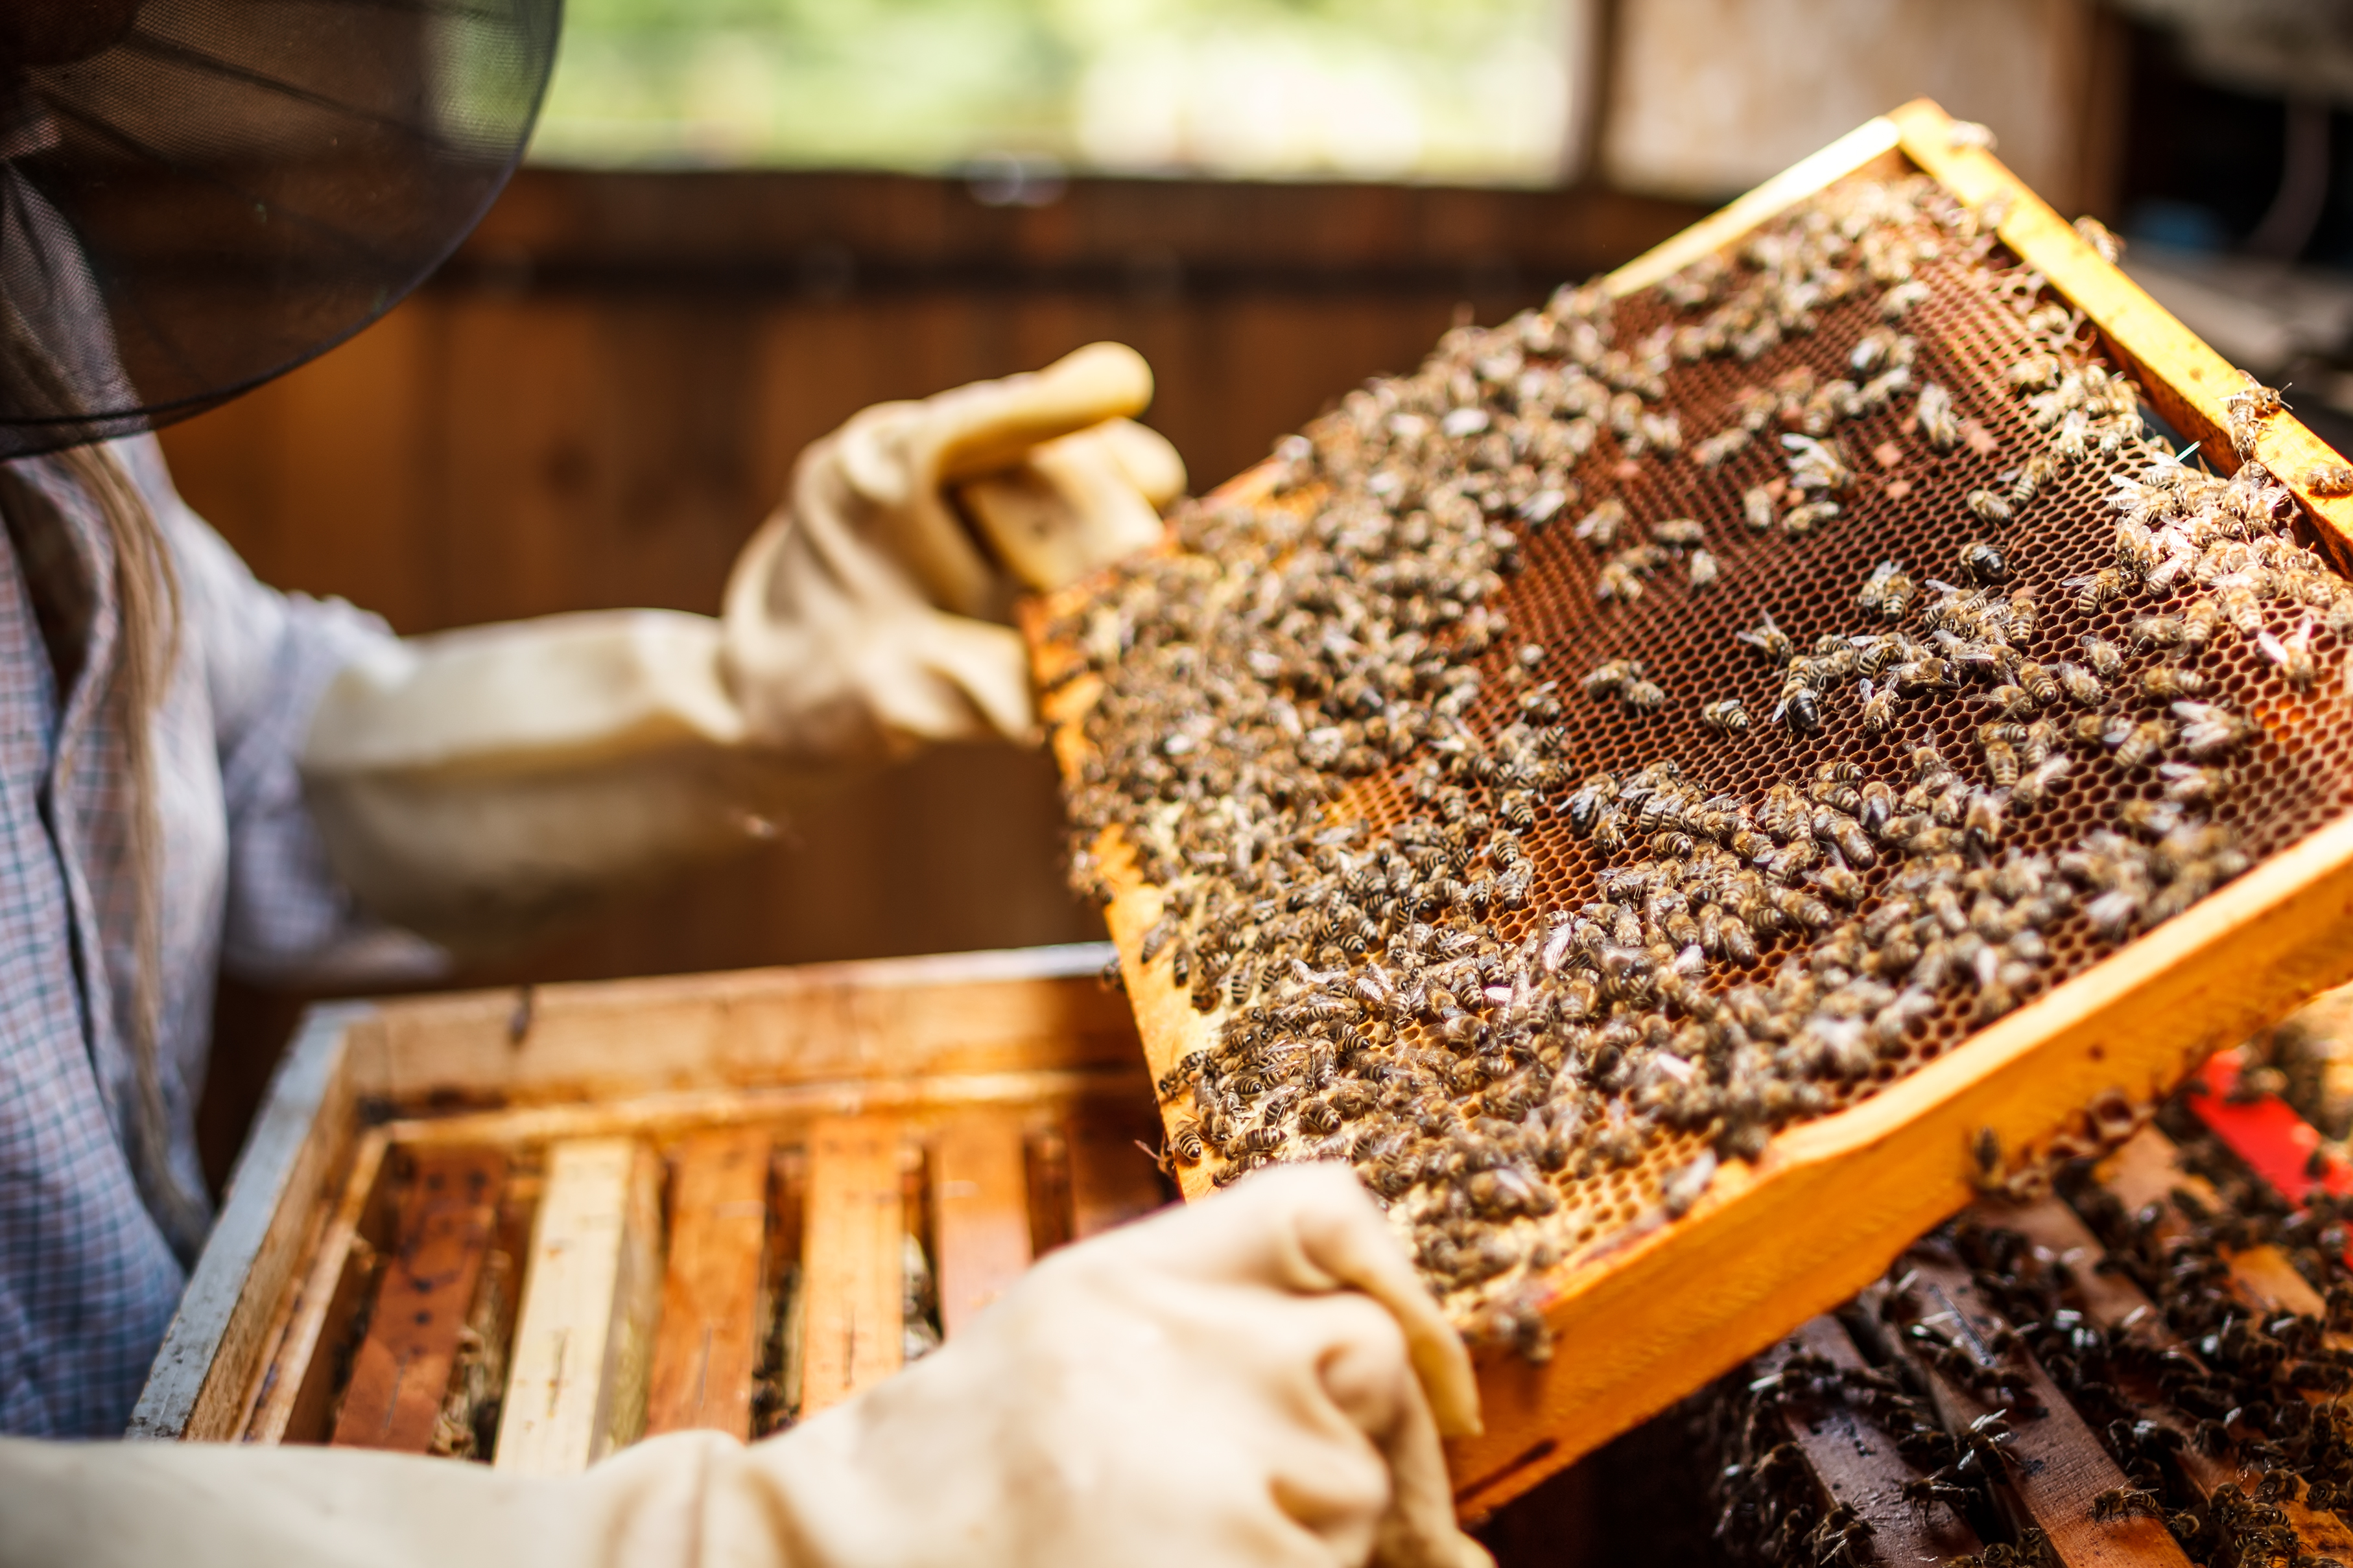 Beekeeper lifting a tray out of a beehive